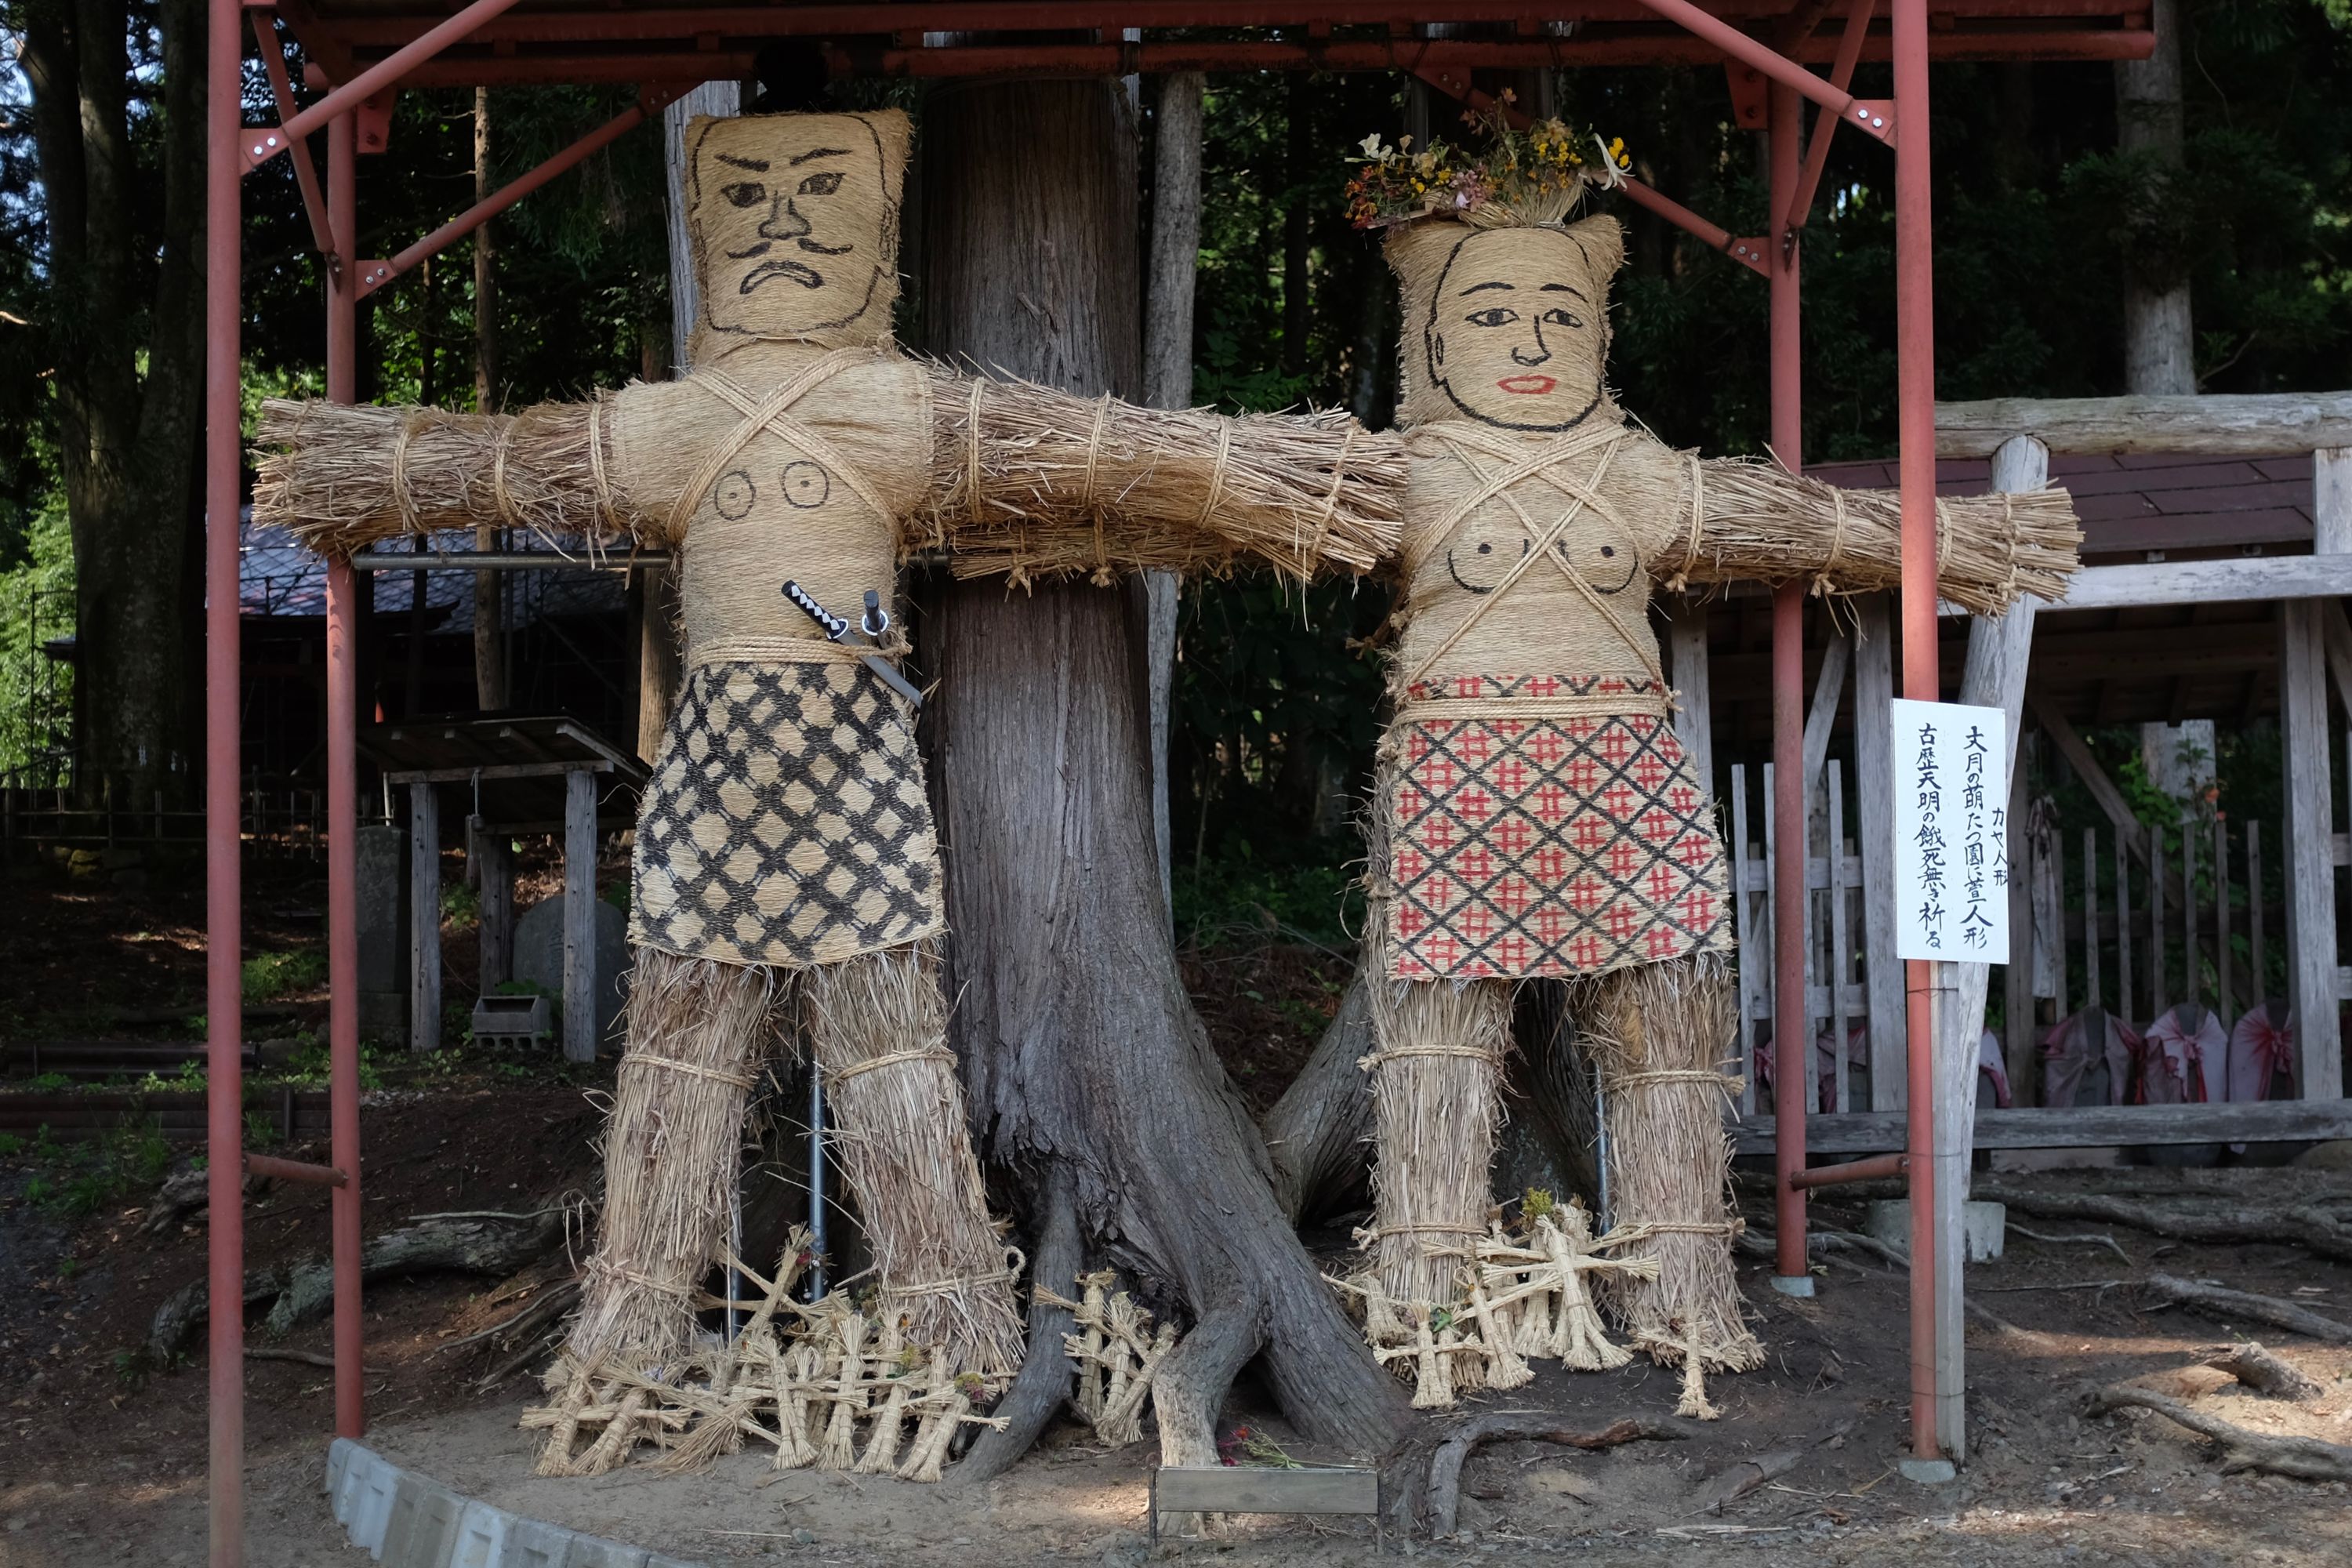 Two large bare-chested human figures made of straw, a man and a woman, stand by a tree.